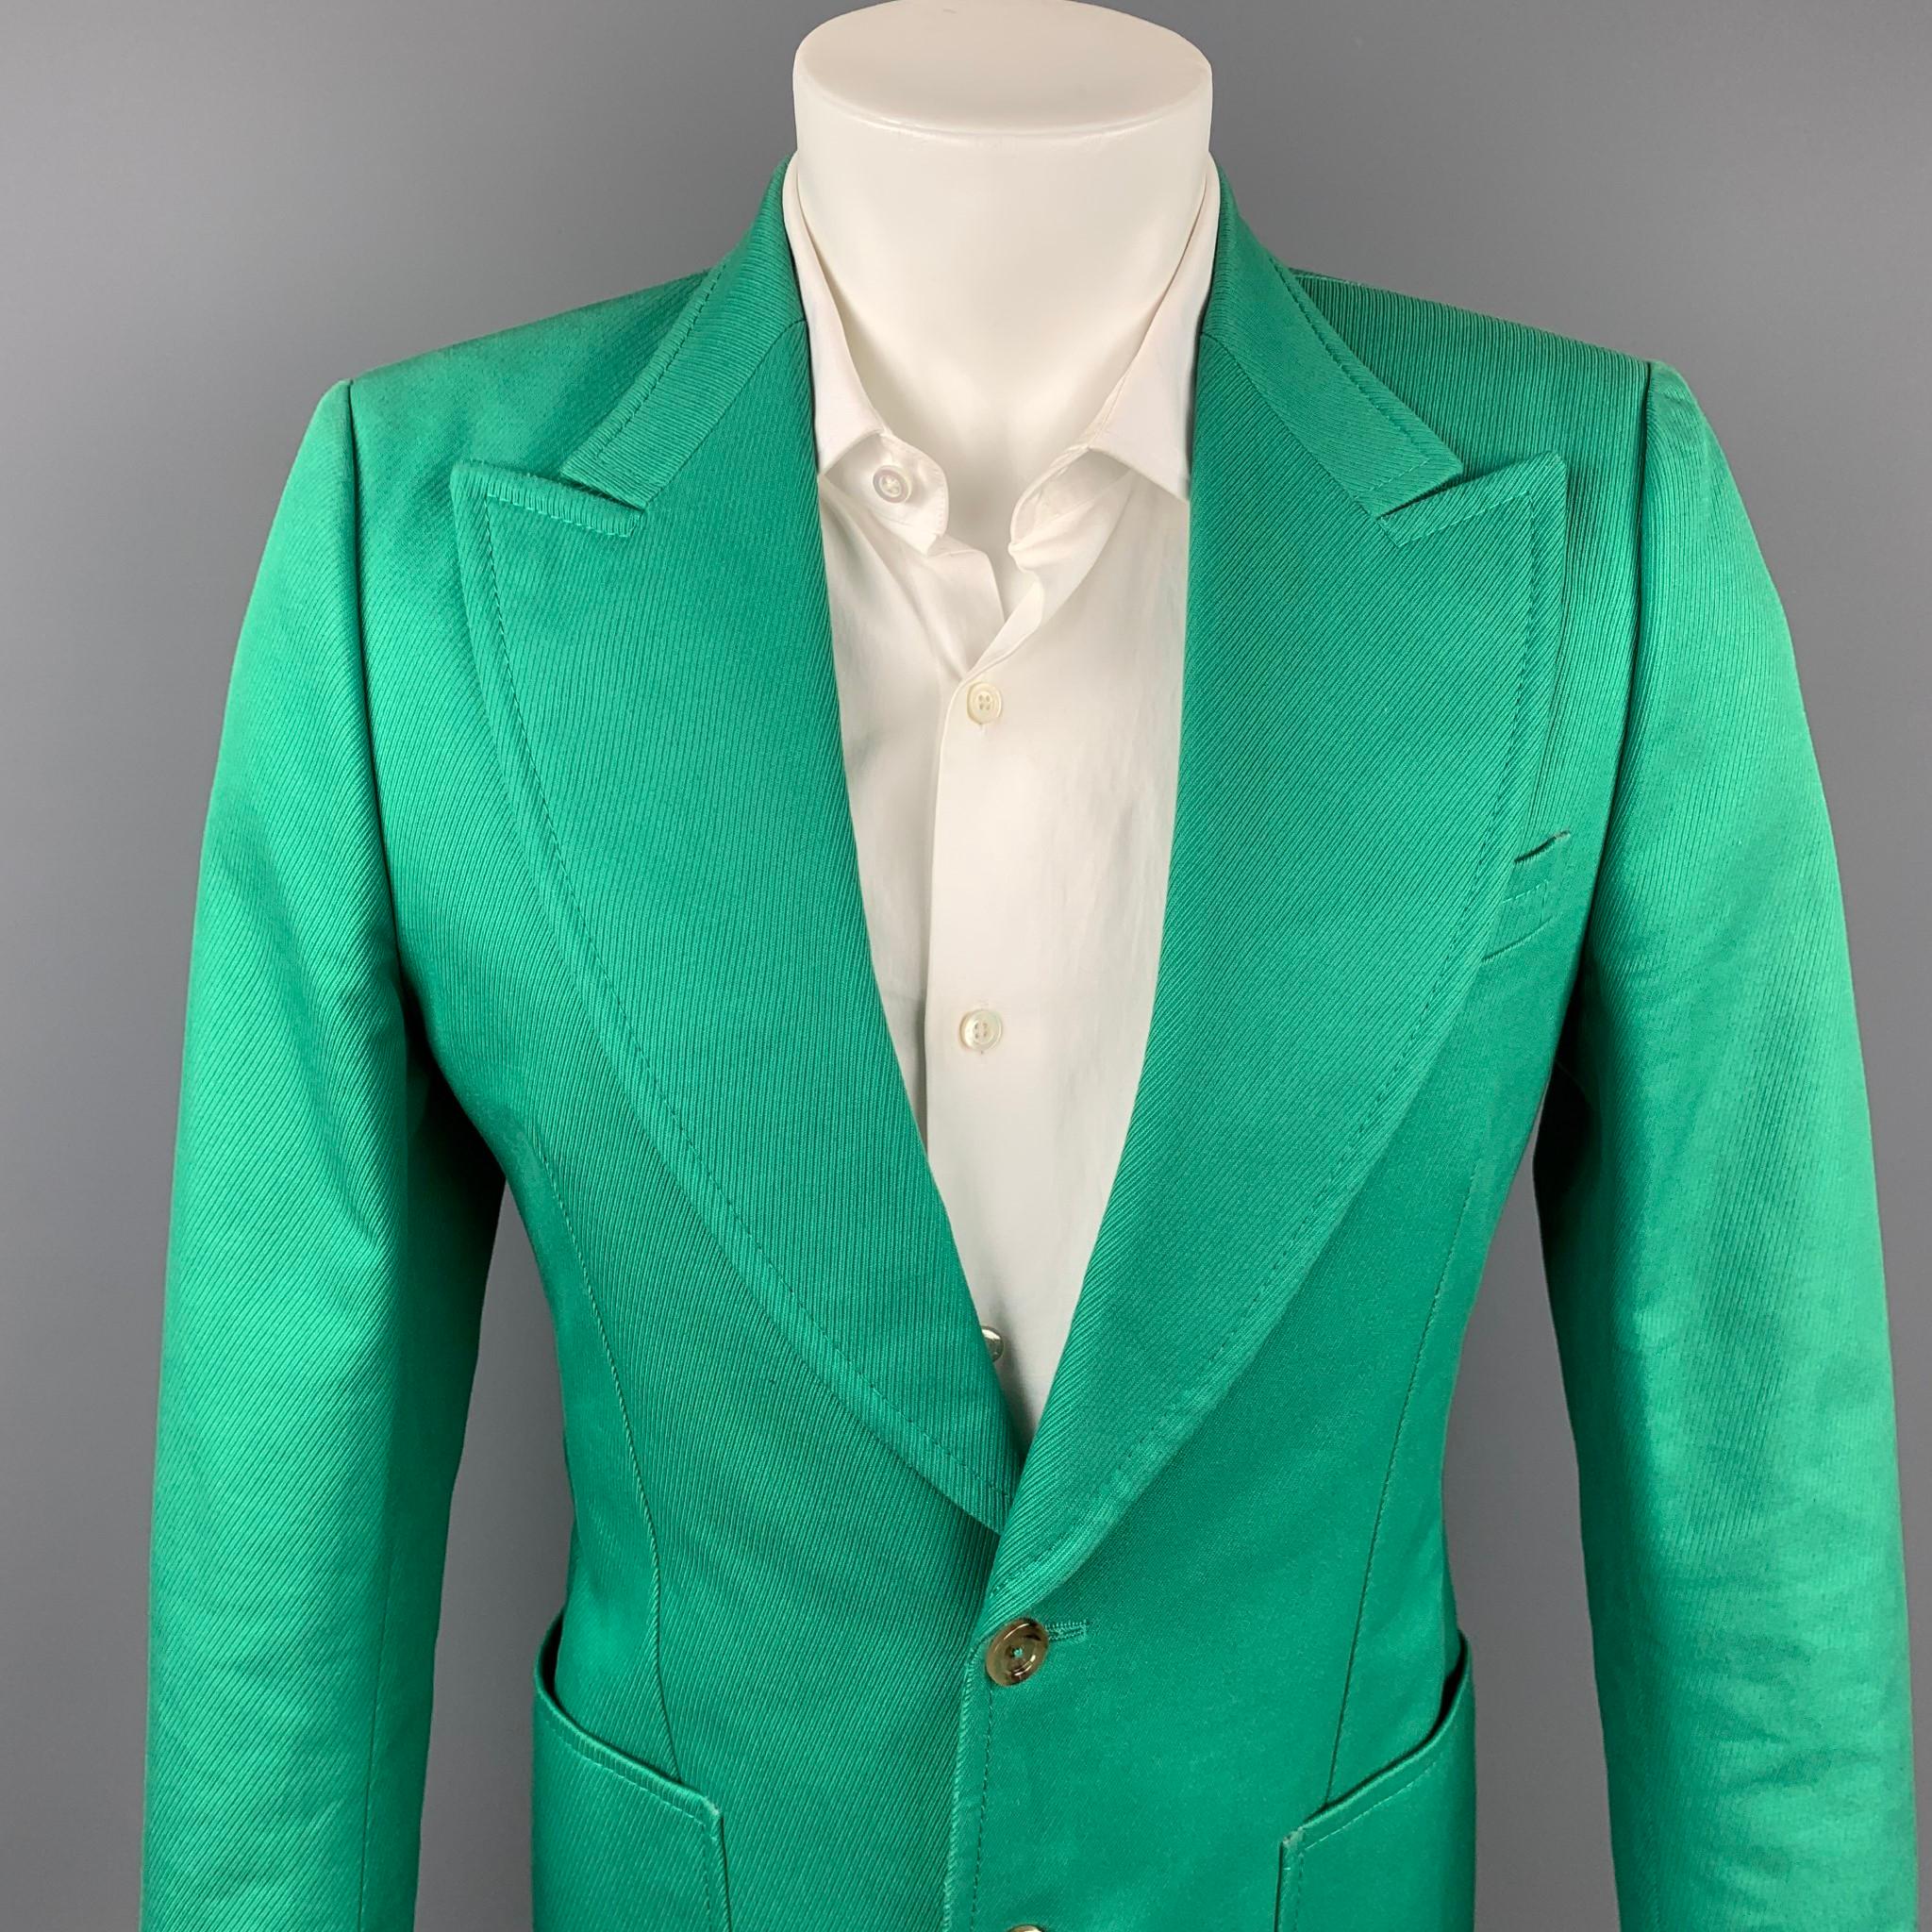 GUCCI by Alessandro Michele sport coat comes in a green cotton with a full liner featuring a peak lapel, patch pockets, and a two button closure. Made in Italy.

Very Good Pre-Owned Condition.
Marked: 7/46 R

Measurements:

Shoulder: 16.5 in.
Chest: